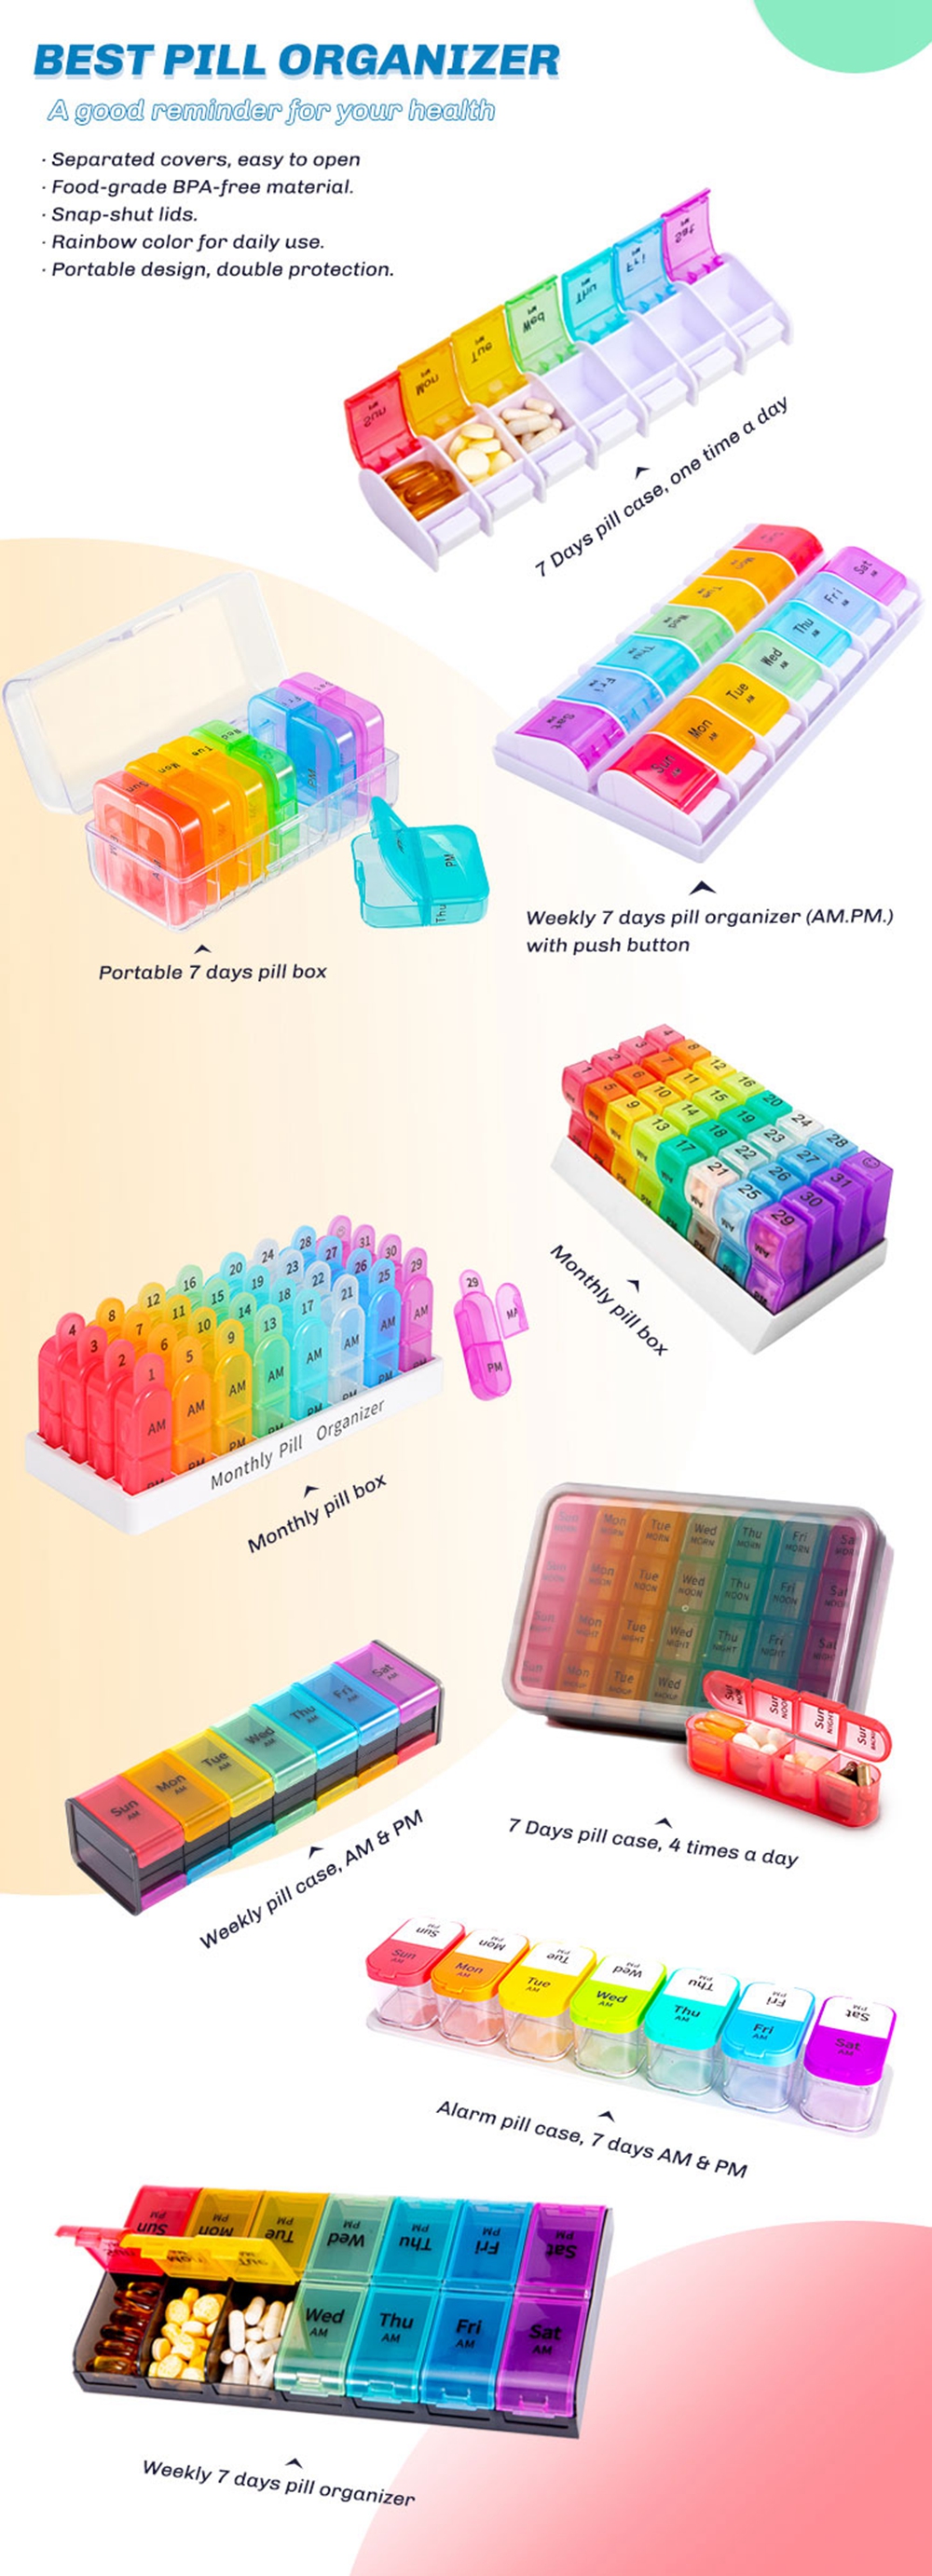 AIMO-14-Cells-Weekly-Pill-Organizer-Open-Left-and-Right-Friendly-Travel-7-Day-Pill-Box-Case-2-Times--1804979-5